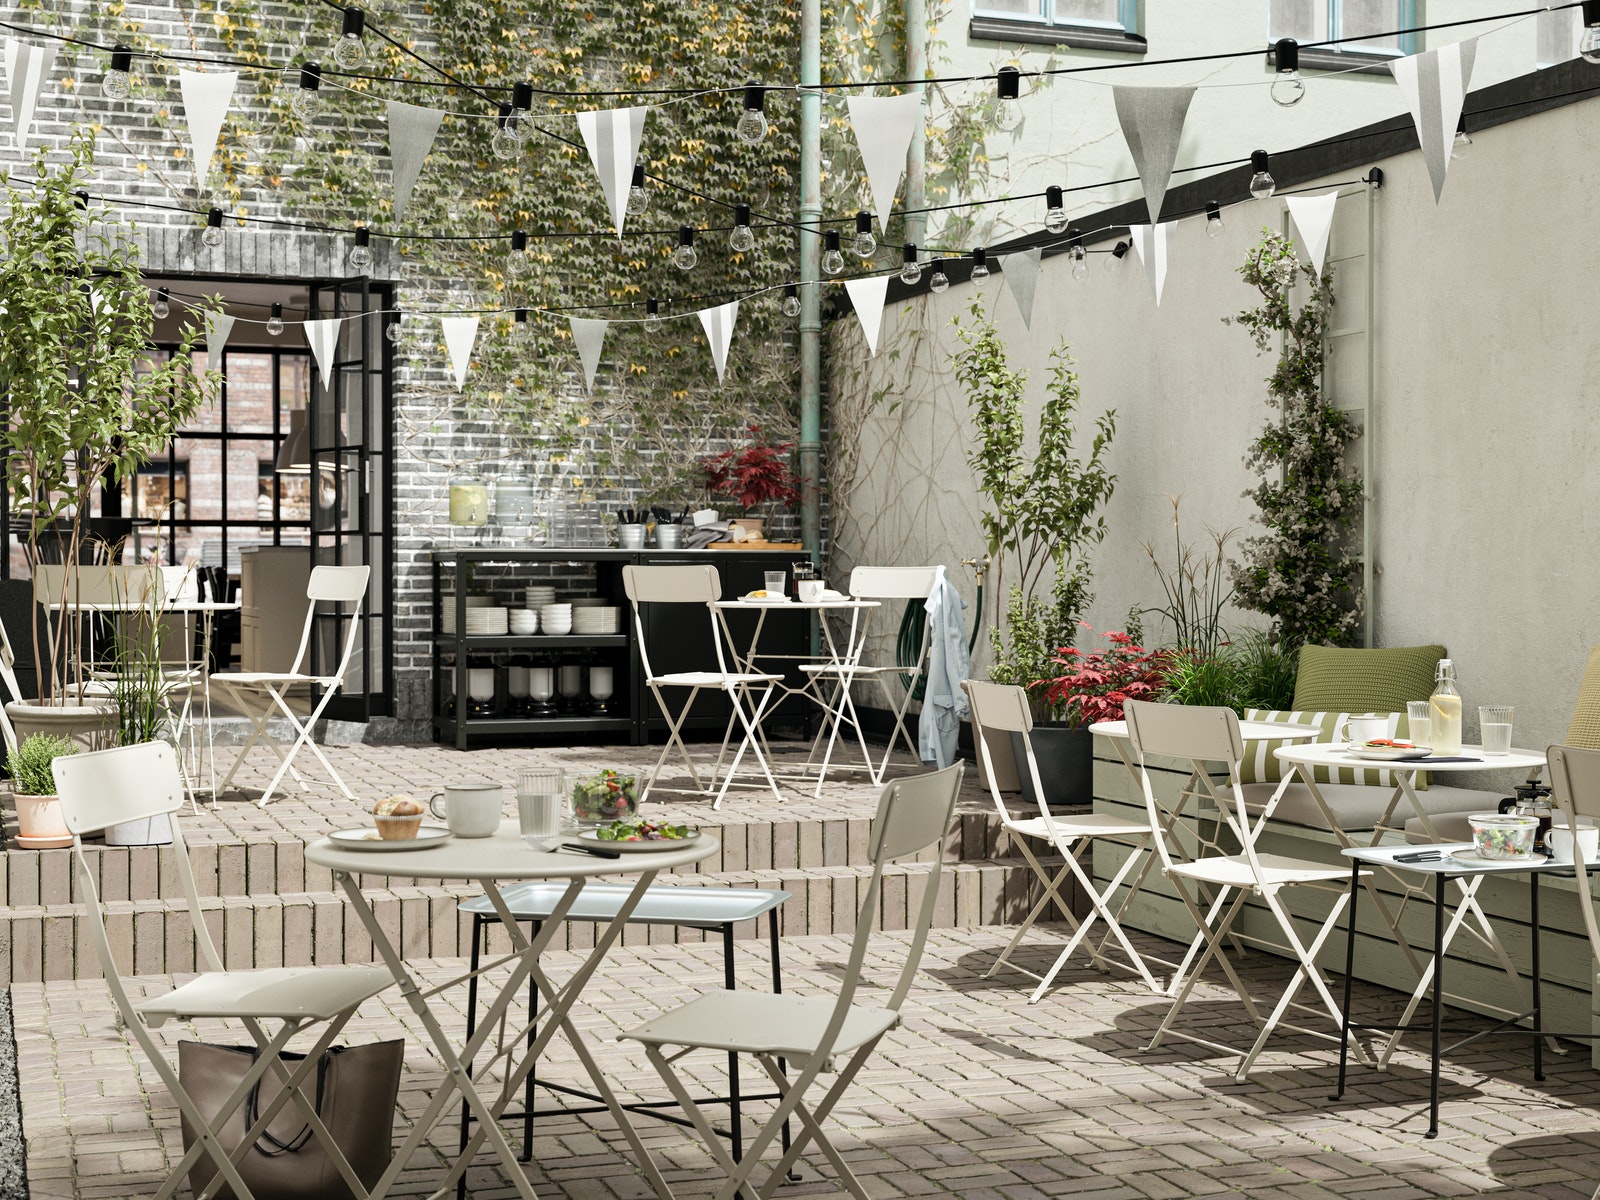 IKEA - A warm and welcoming outdoor café